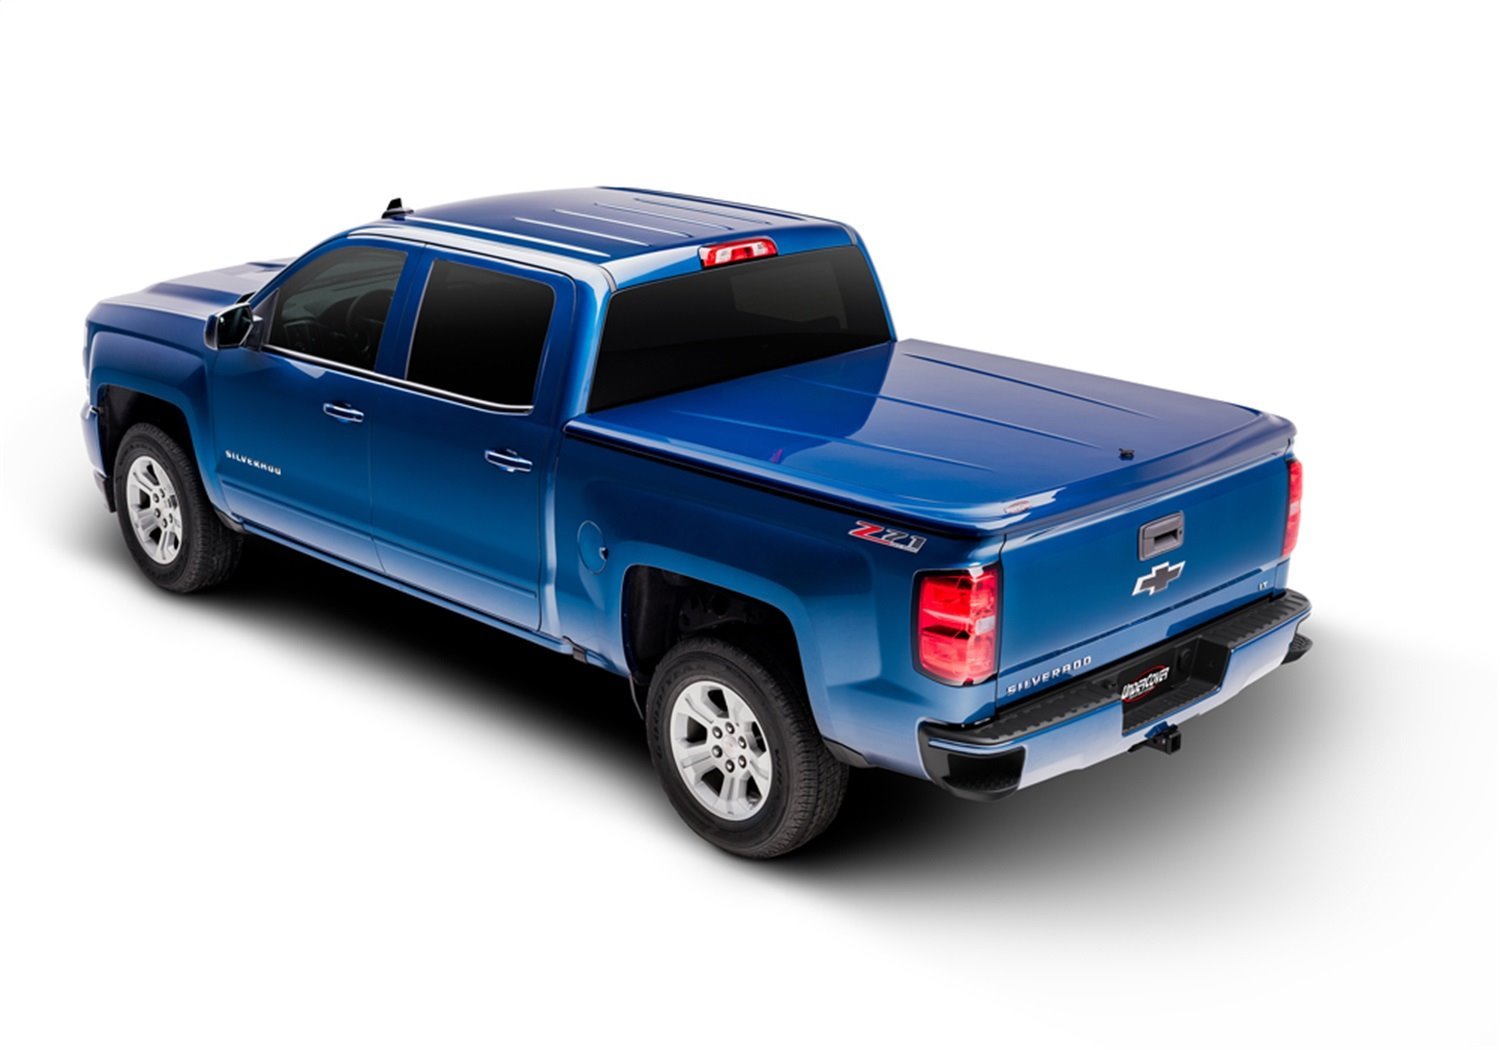 UC2156L-YZ LUX Hard Non-Folding Cover, 2015-2020 Ford F-150 5'7" Bed EXT/Crew, YZ Oxford White